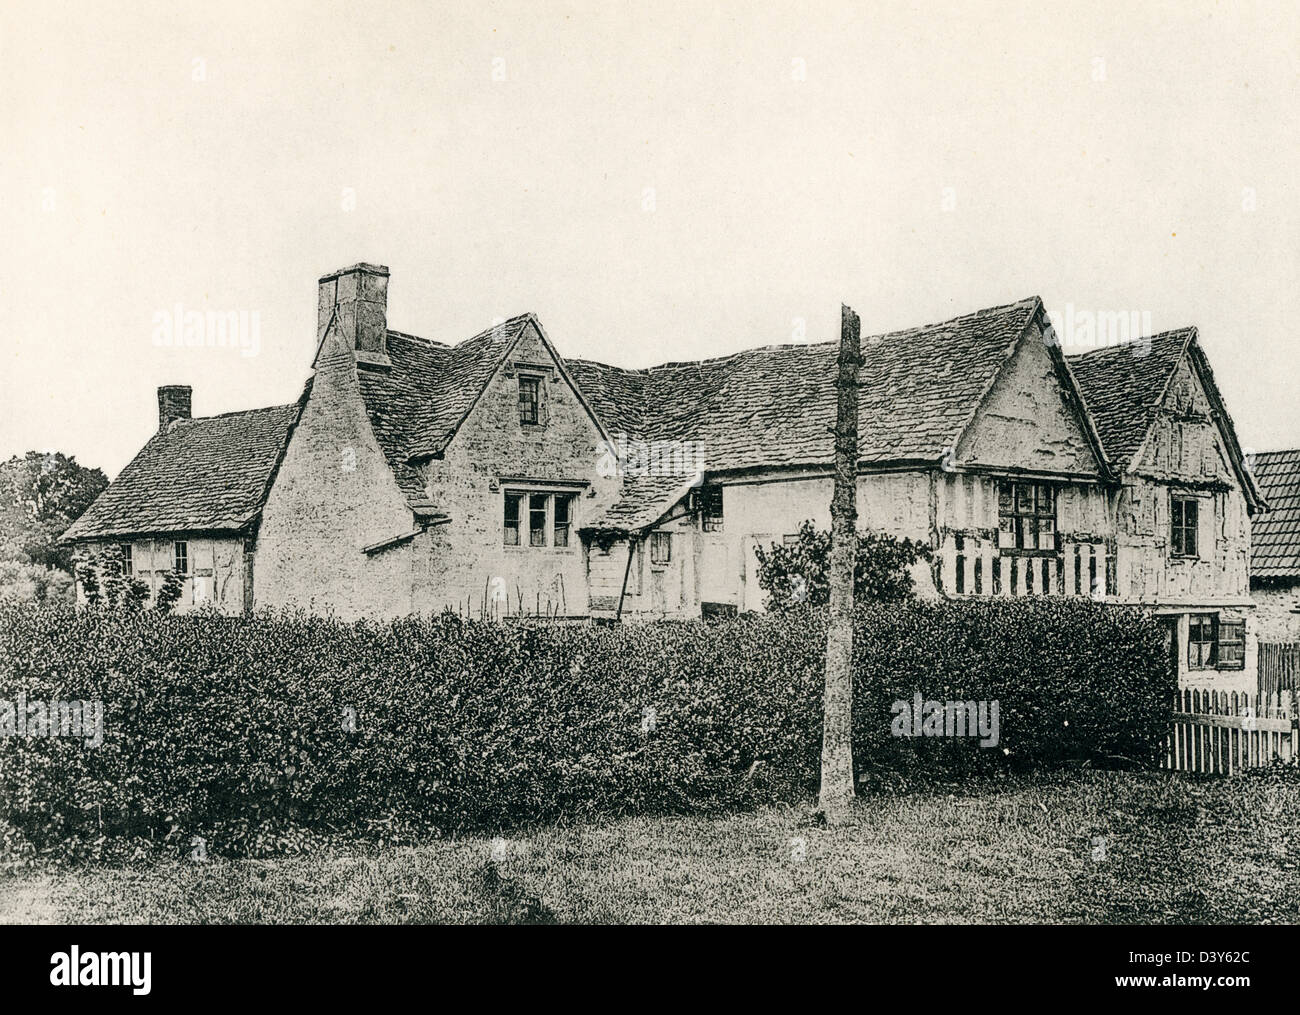 A collotype plate ' A Farmhouse at Leonard Stanley, near Stroud, Glos.' scanned at high resolution from a book published in 1905 Stock Photo